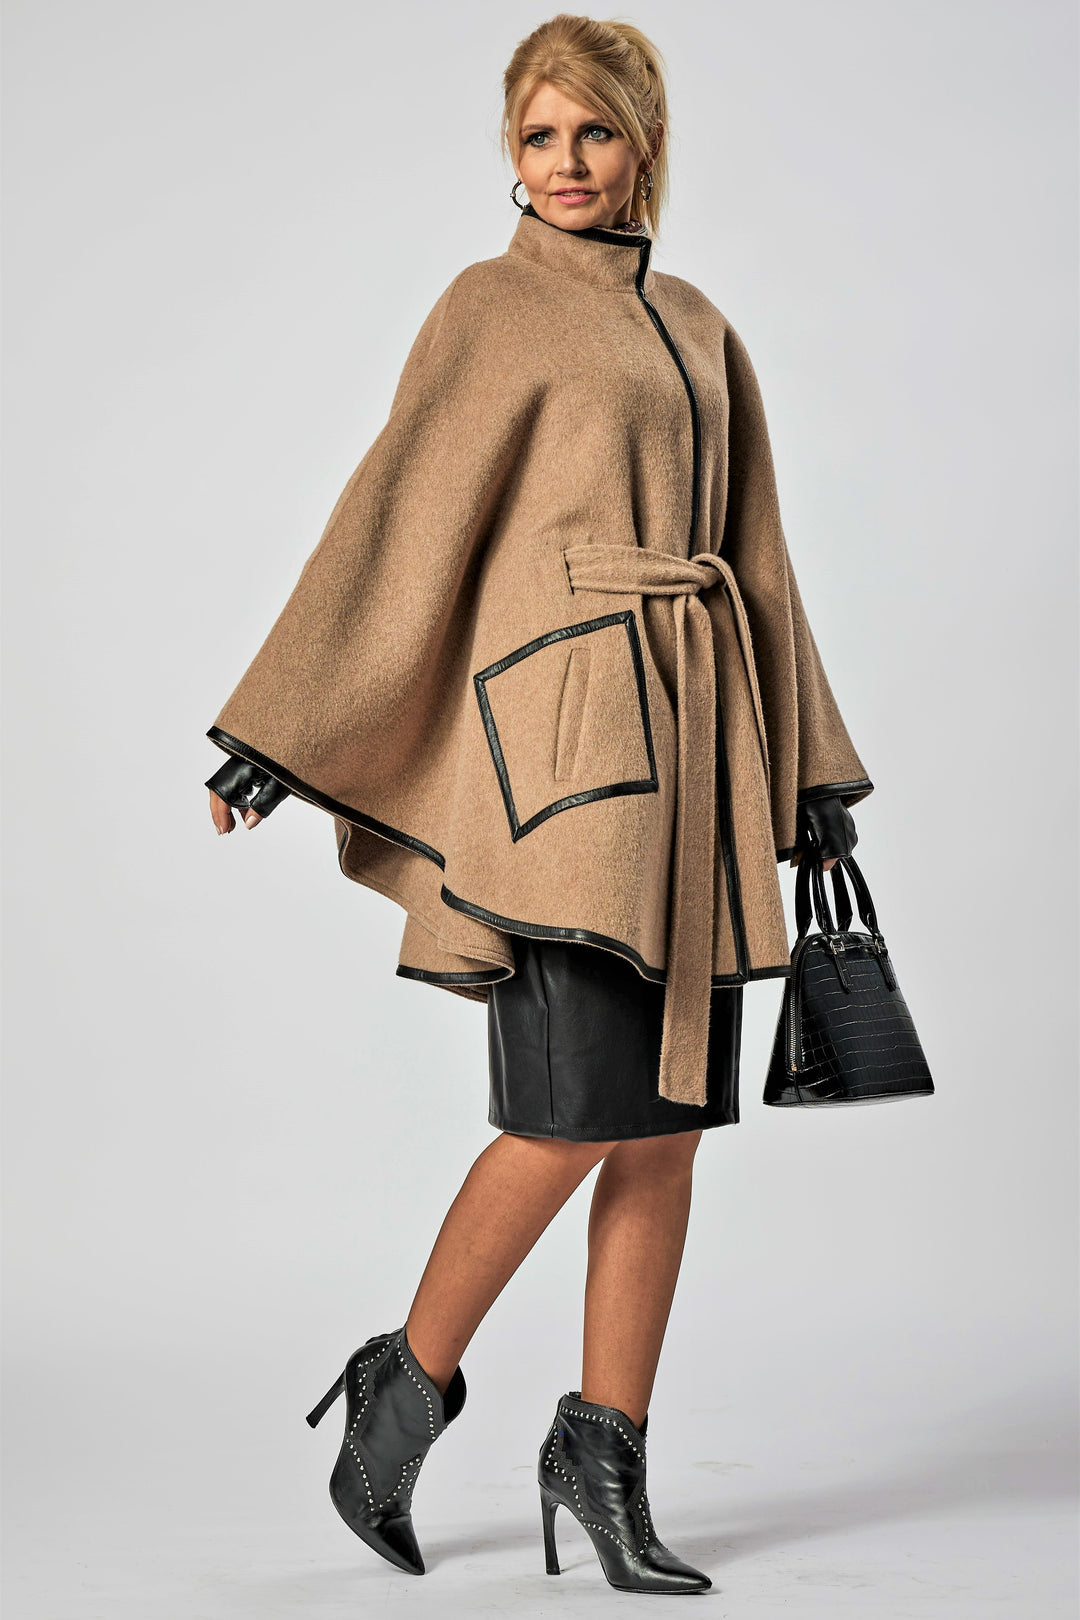 Beige Alpaca Wool Belted Cape Poncho Coat Brown Leather